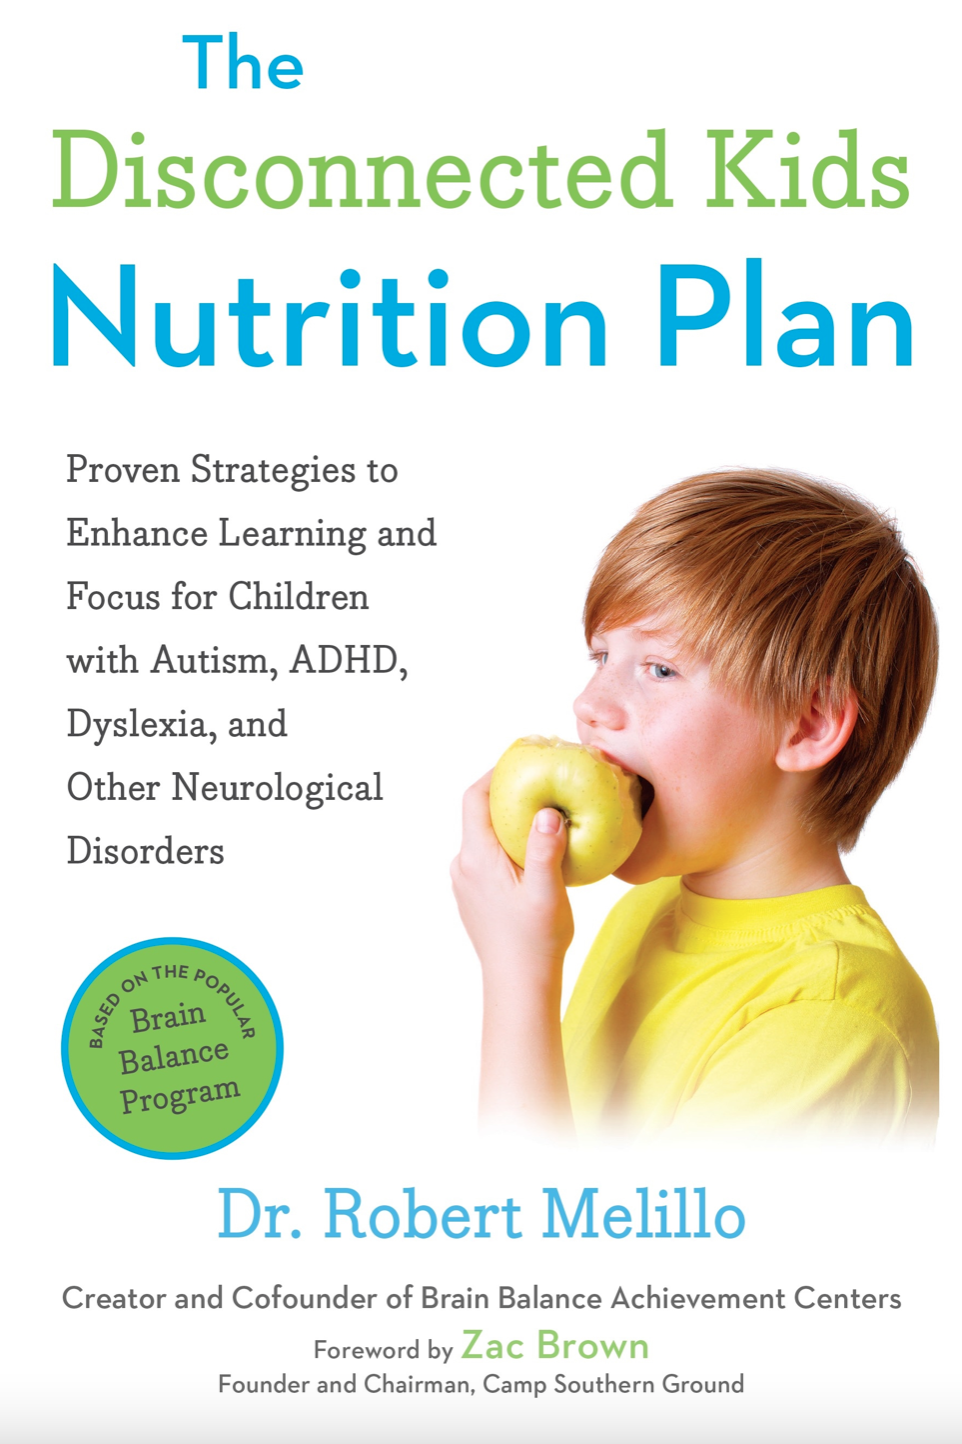 The disconnected kids nutrition plan* (Melilo)